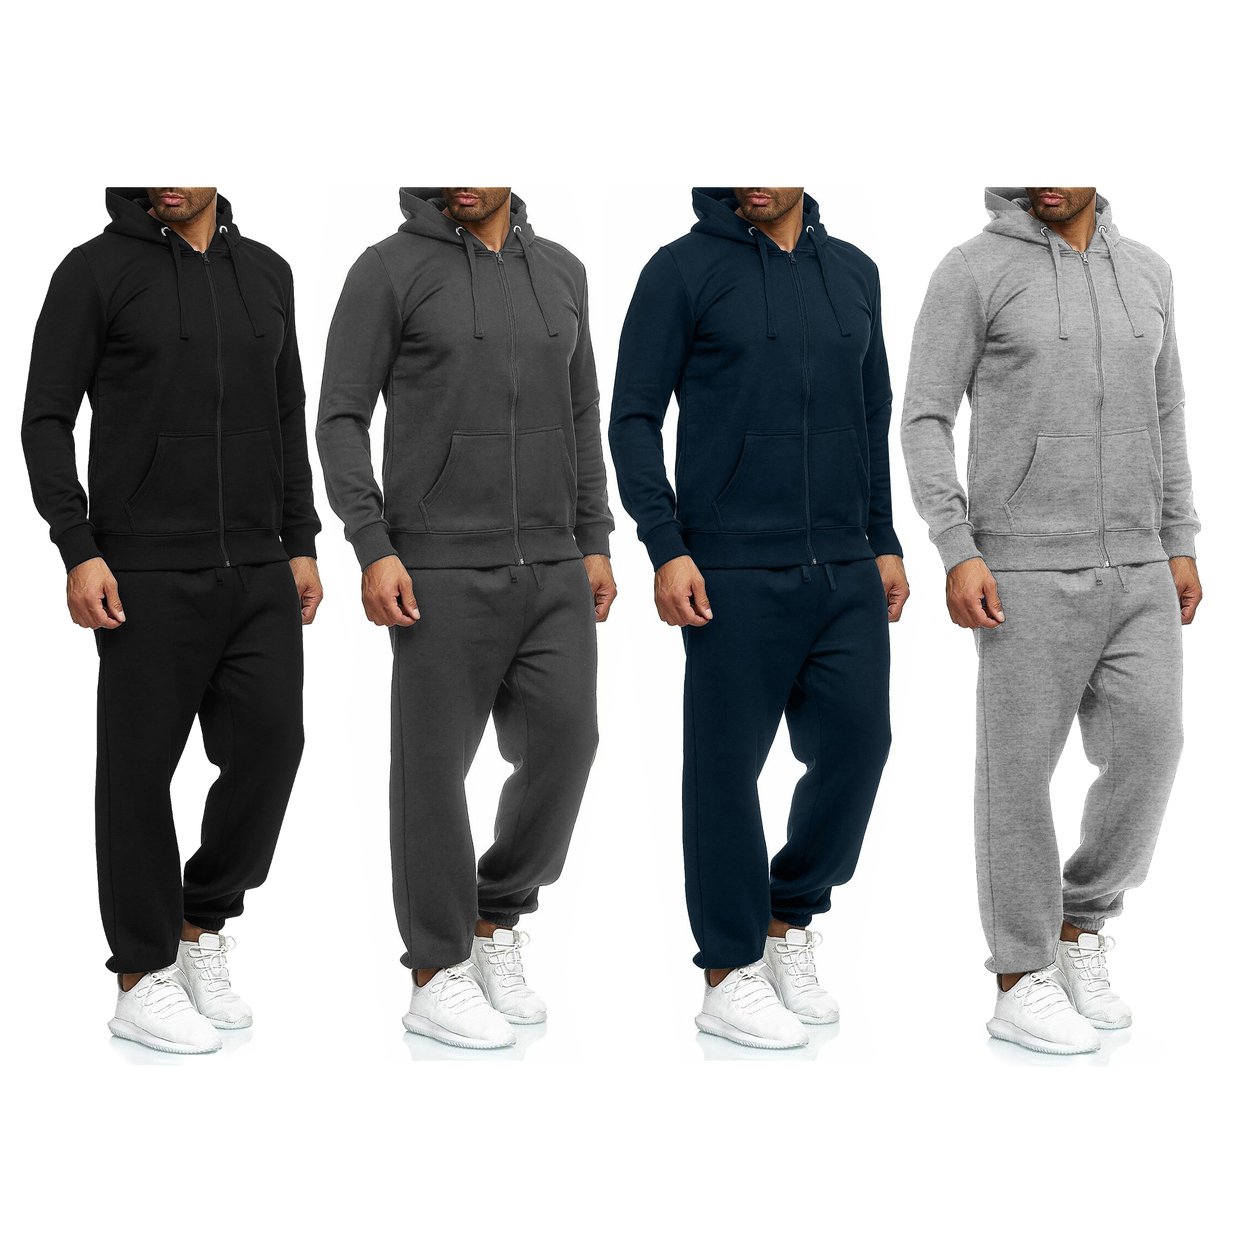 Multi-Pack: Men's Casual Big & Tall Athletic Active Winter Warm Fleece Lined Full Zip Tracksuit Jogger Set - Black, 1-pack, Large